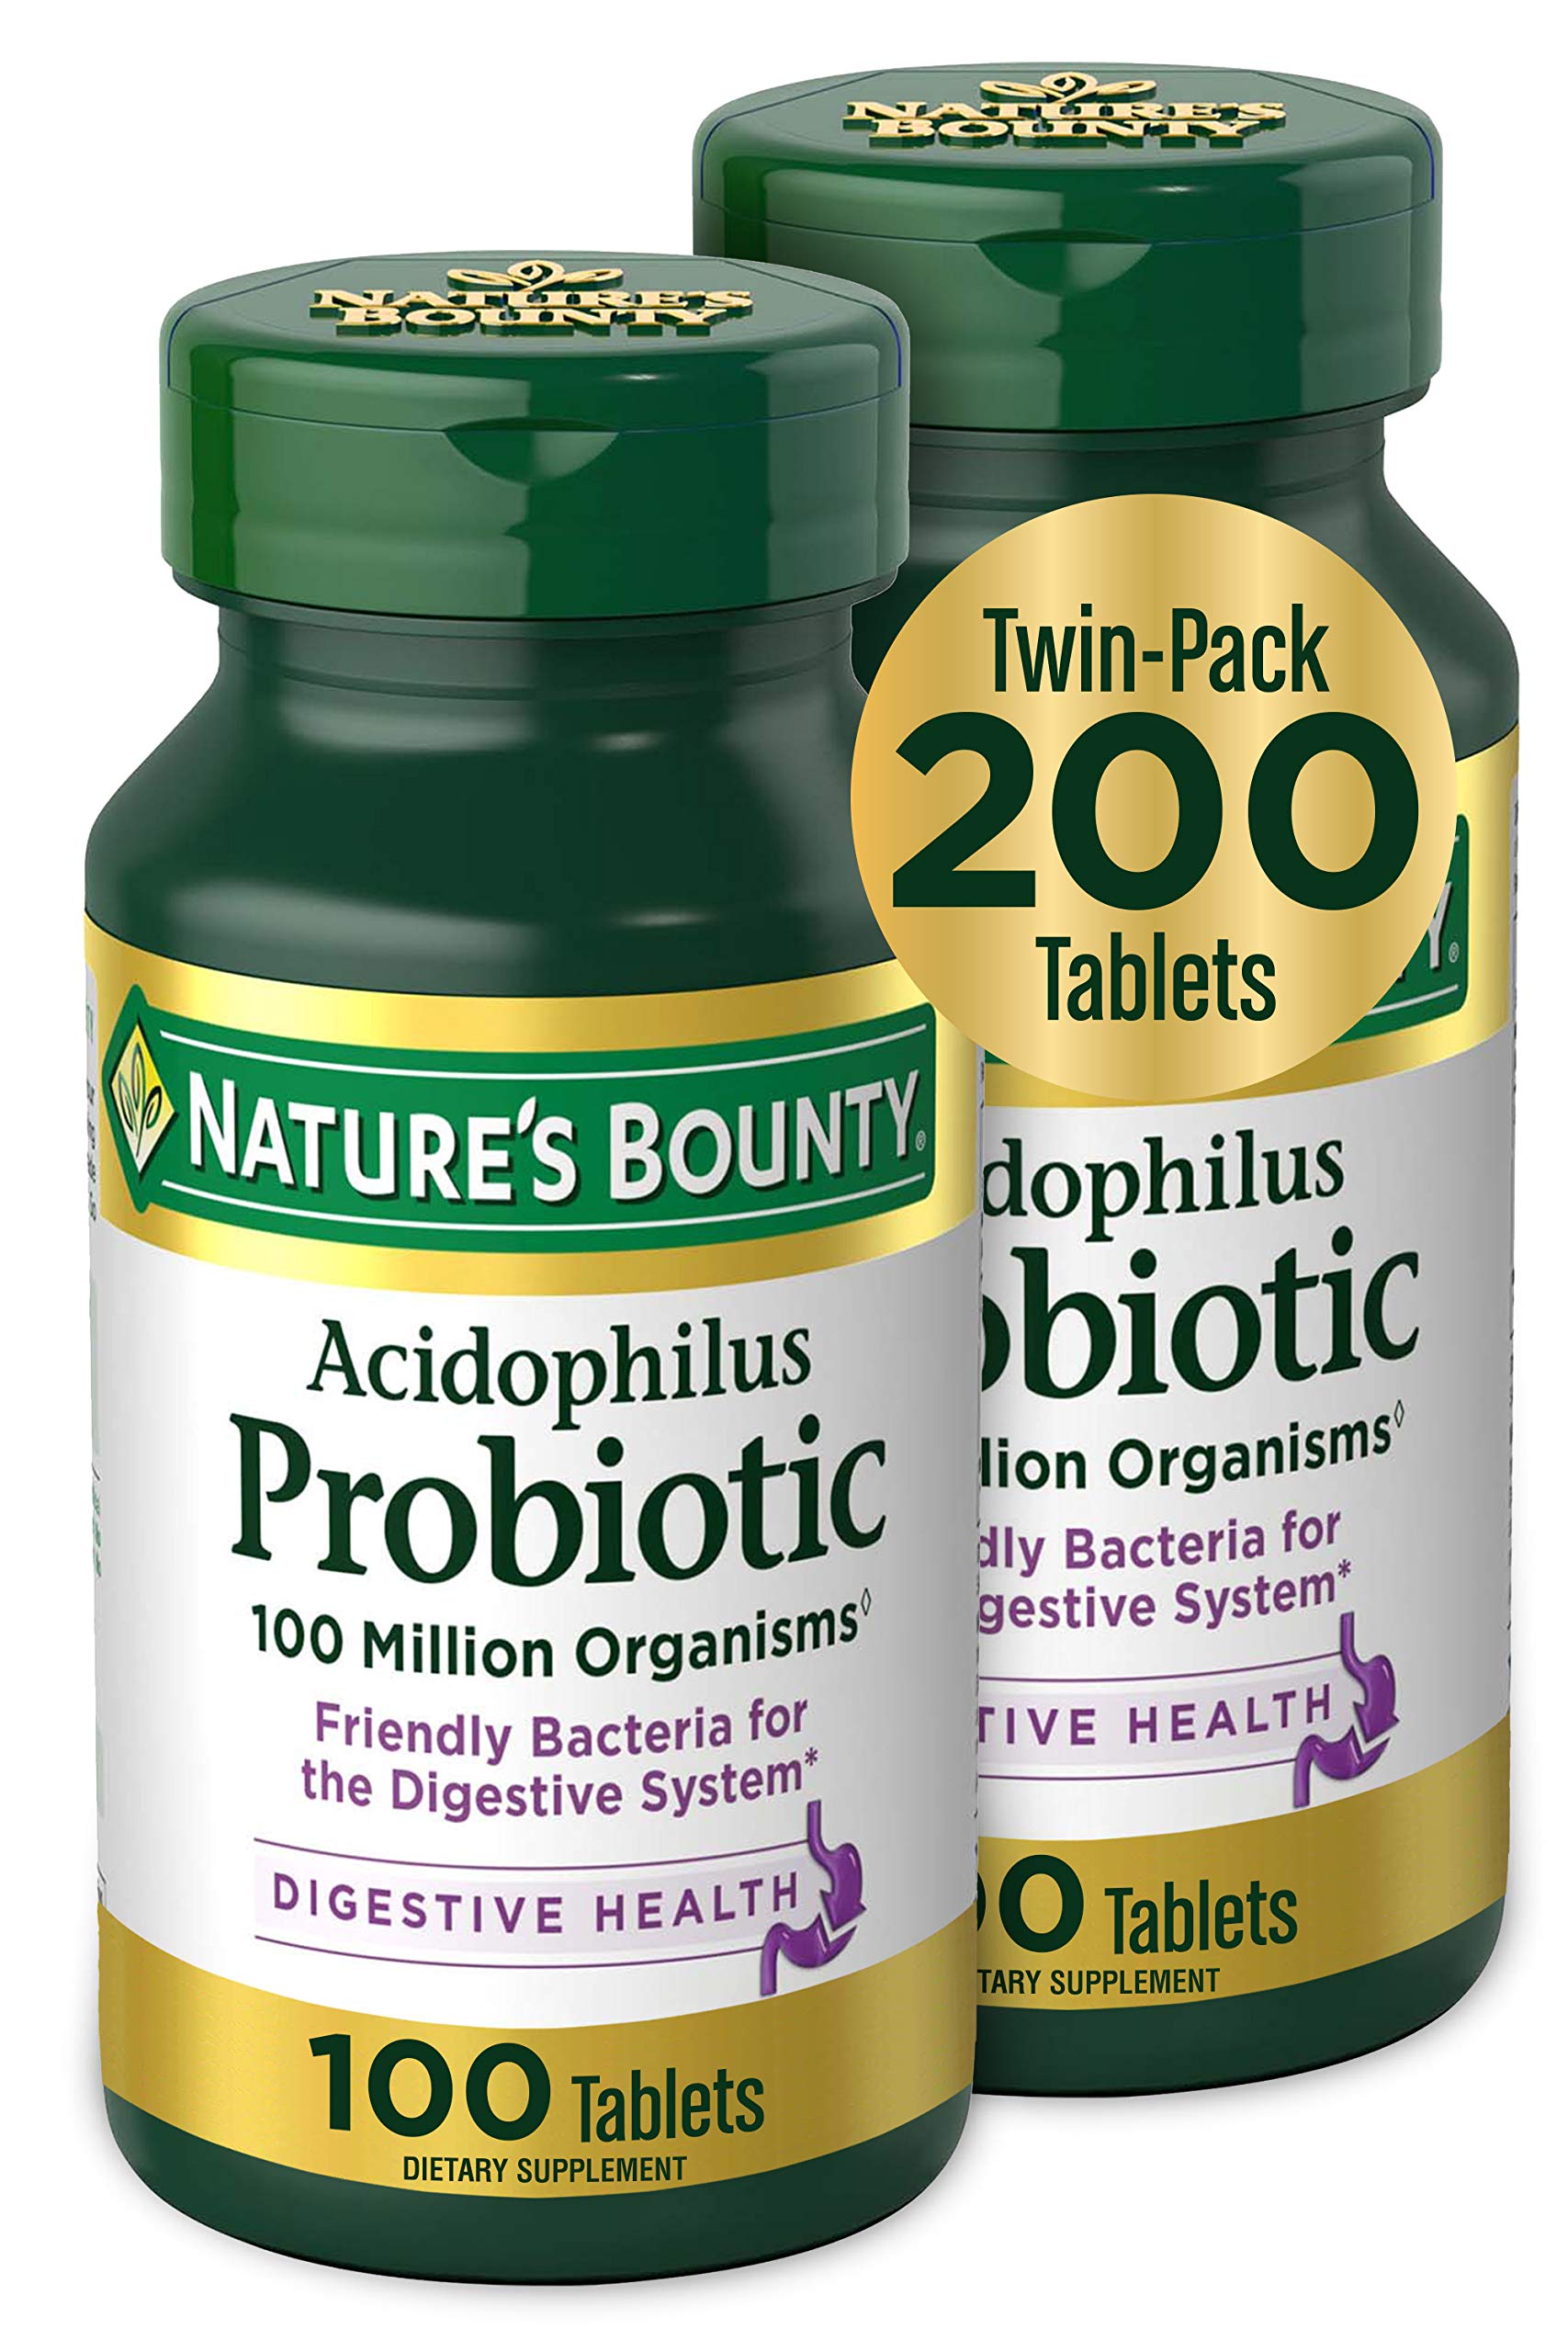 Acidophilus Probiotic by Nature's Bounty, Dietary Supplement, For Digestive Health, Twin Pack, 200 Tablets (7572874100974)